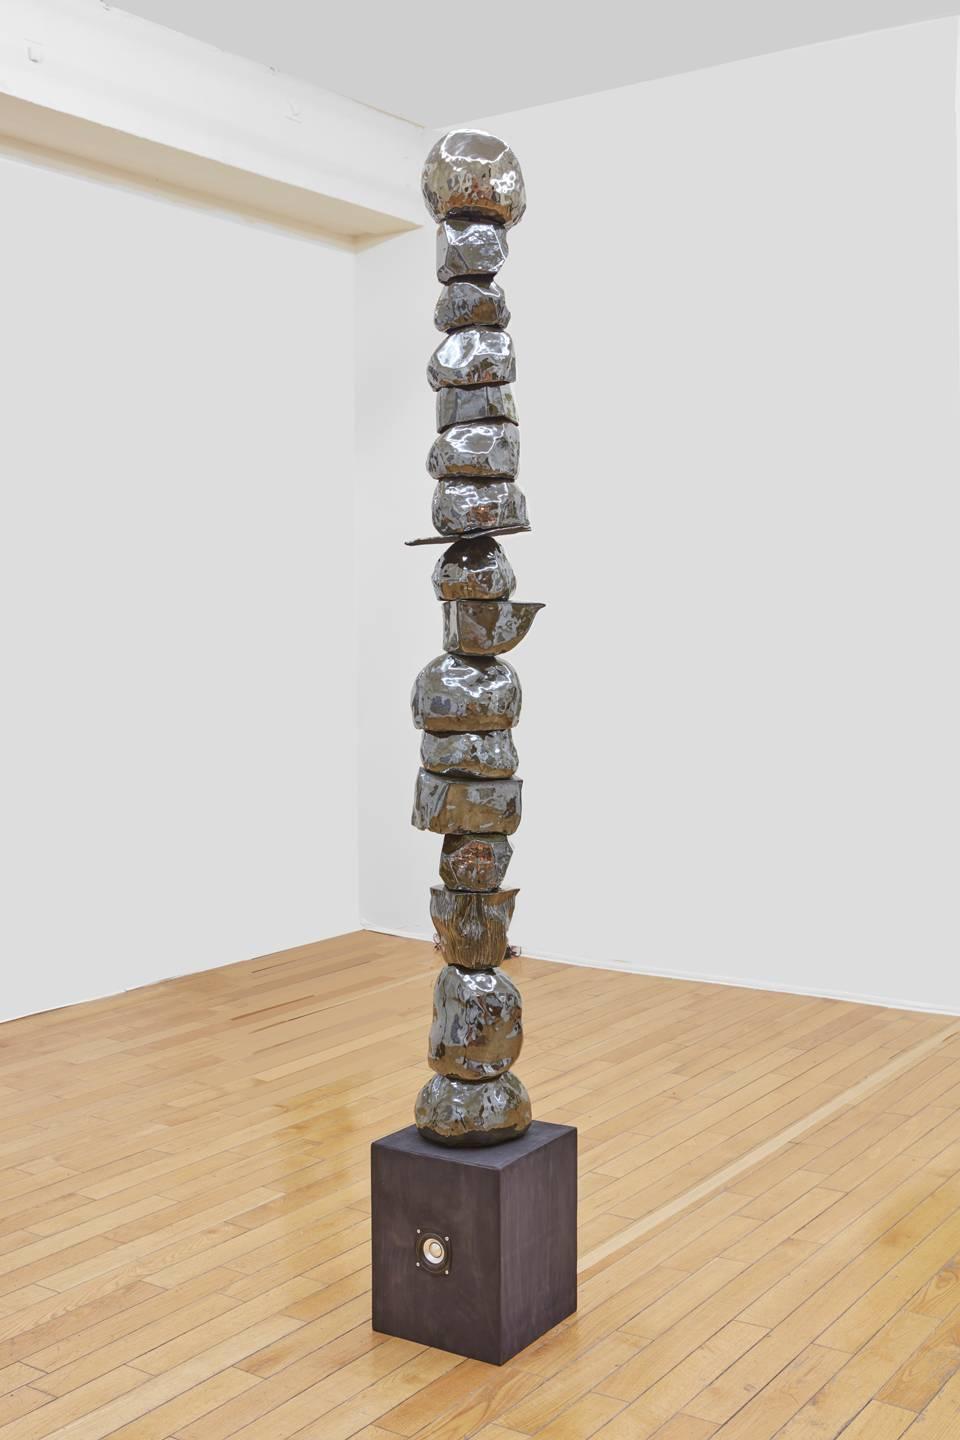 J Ivcevich, Chromedome (cairn), Tribal ceramic, steel, and wood sculpture, 2018 - Mixed Media Art by J. Ivcevich